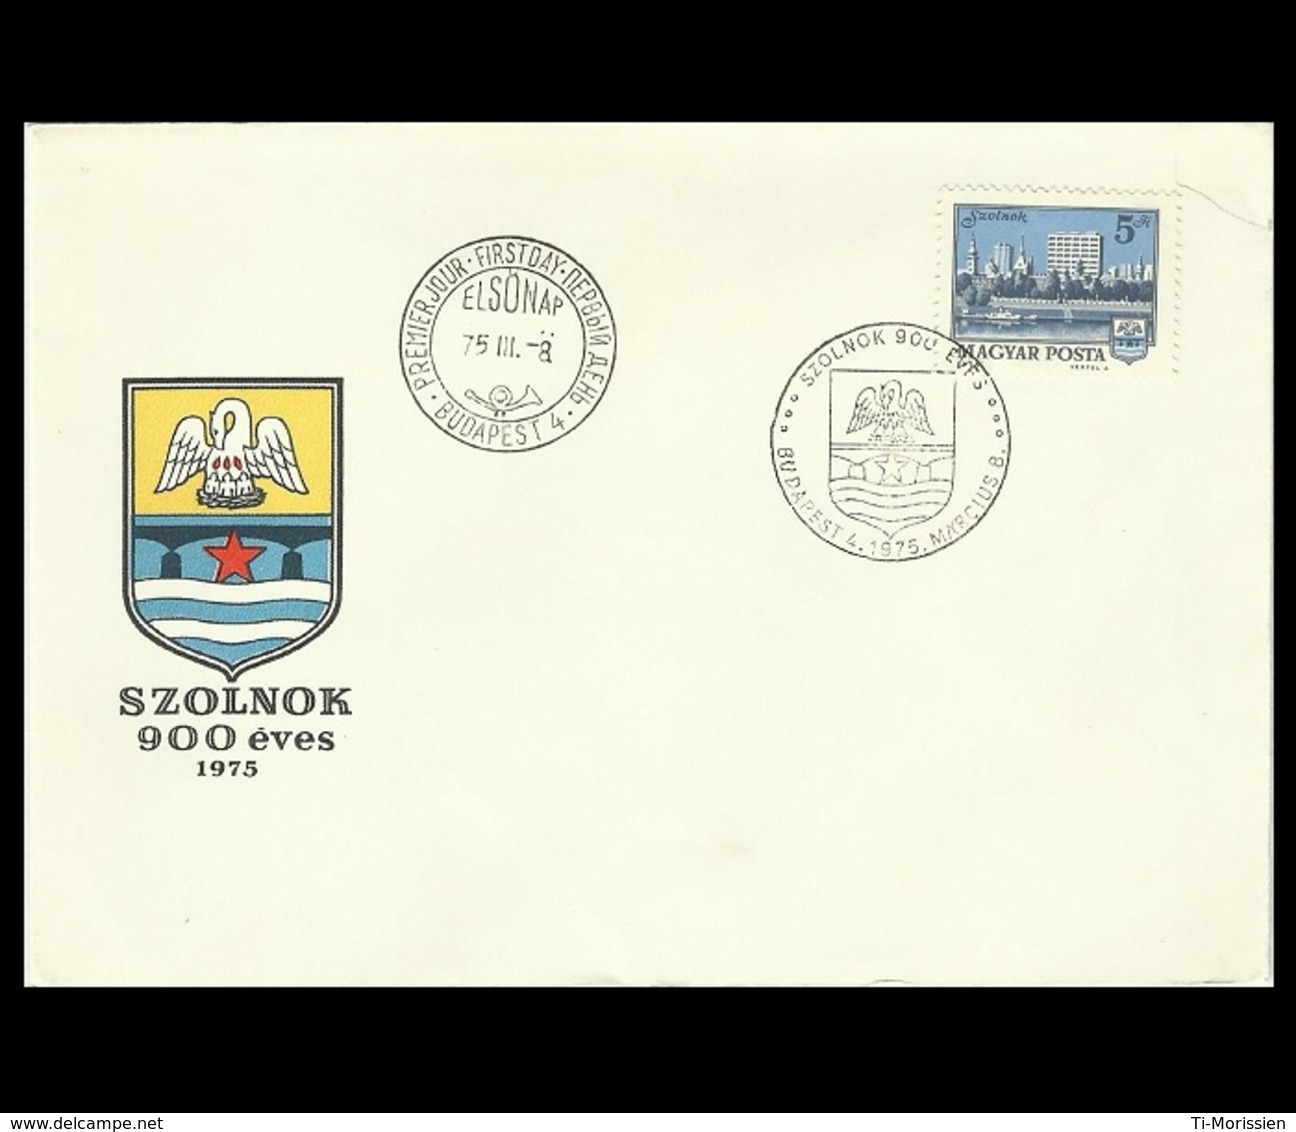 Hungary 1975 Definitive FDC - FDC